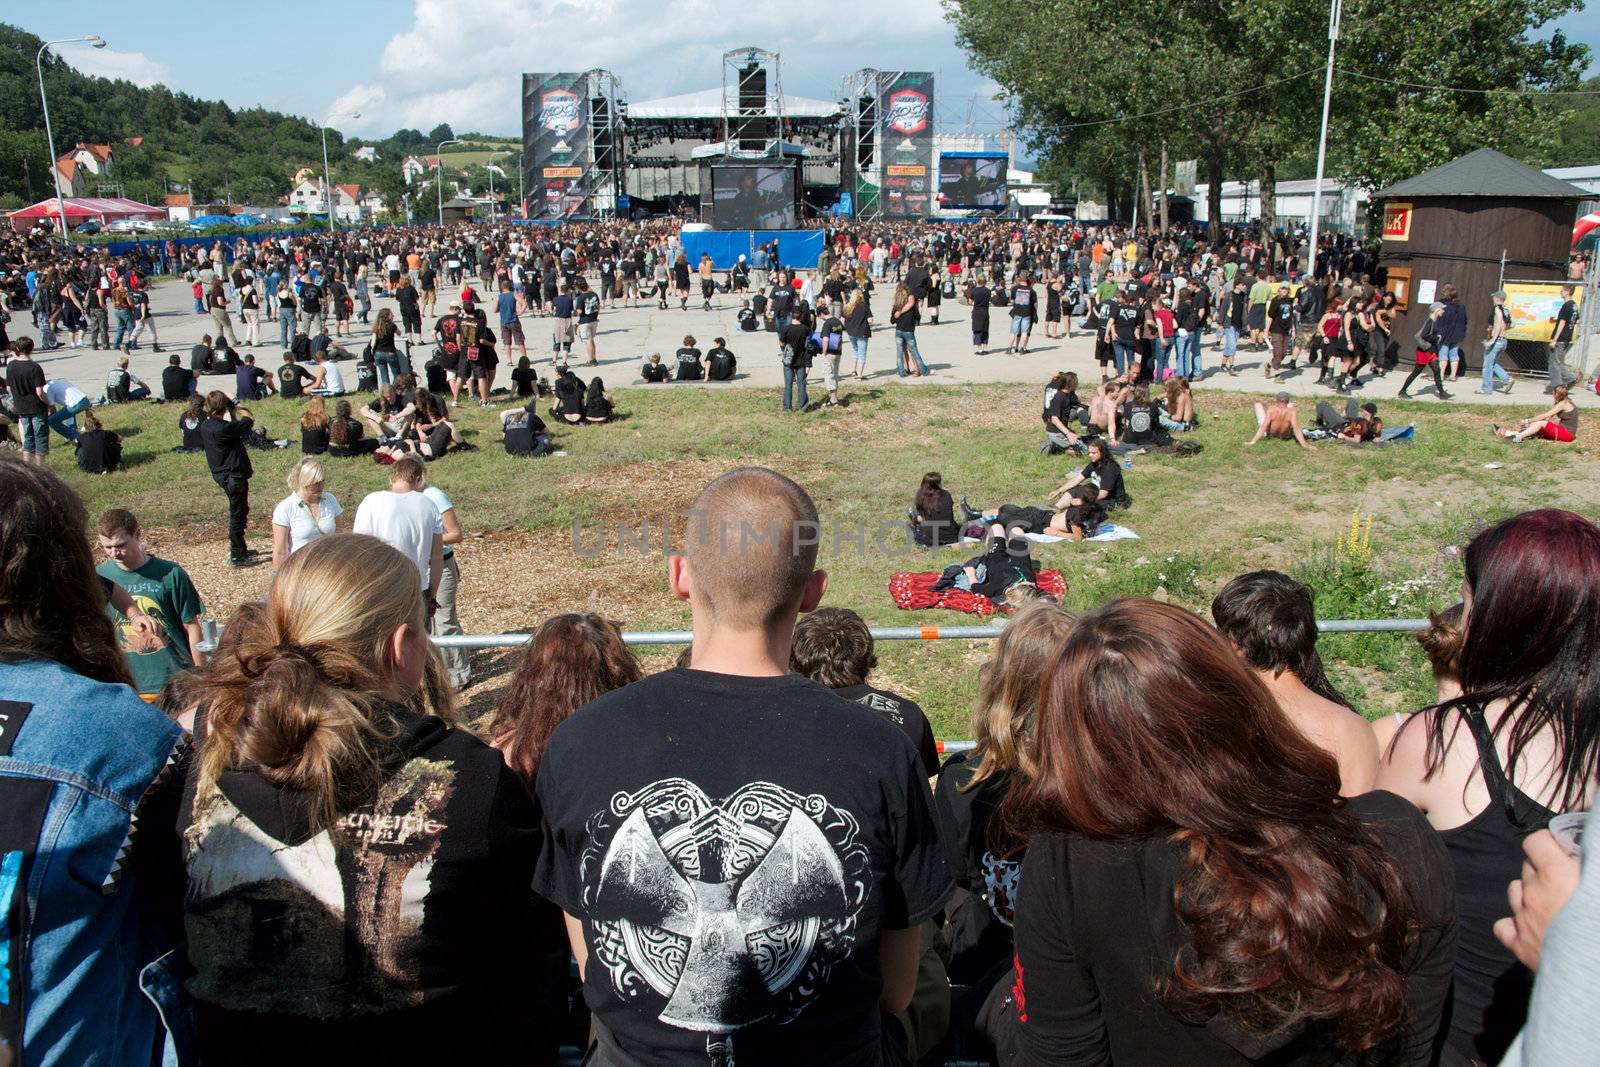 VIZOVICE - JULY 09: Crowd at the Masters of Rock 2009 festival